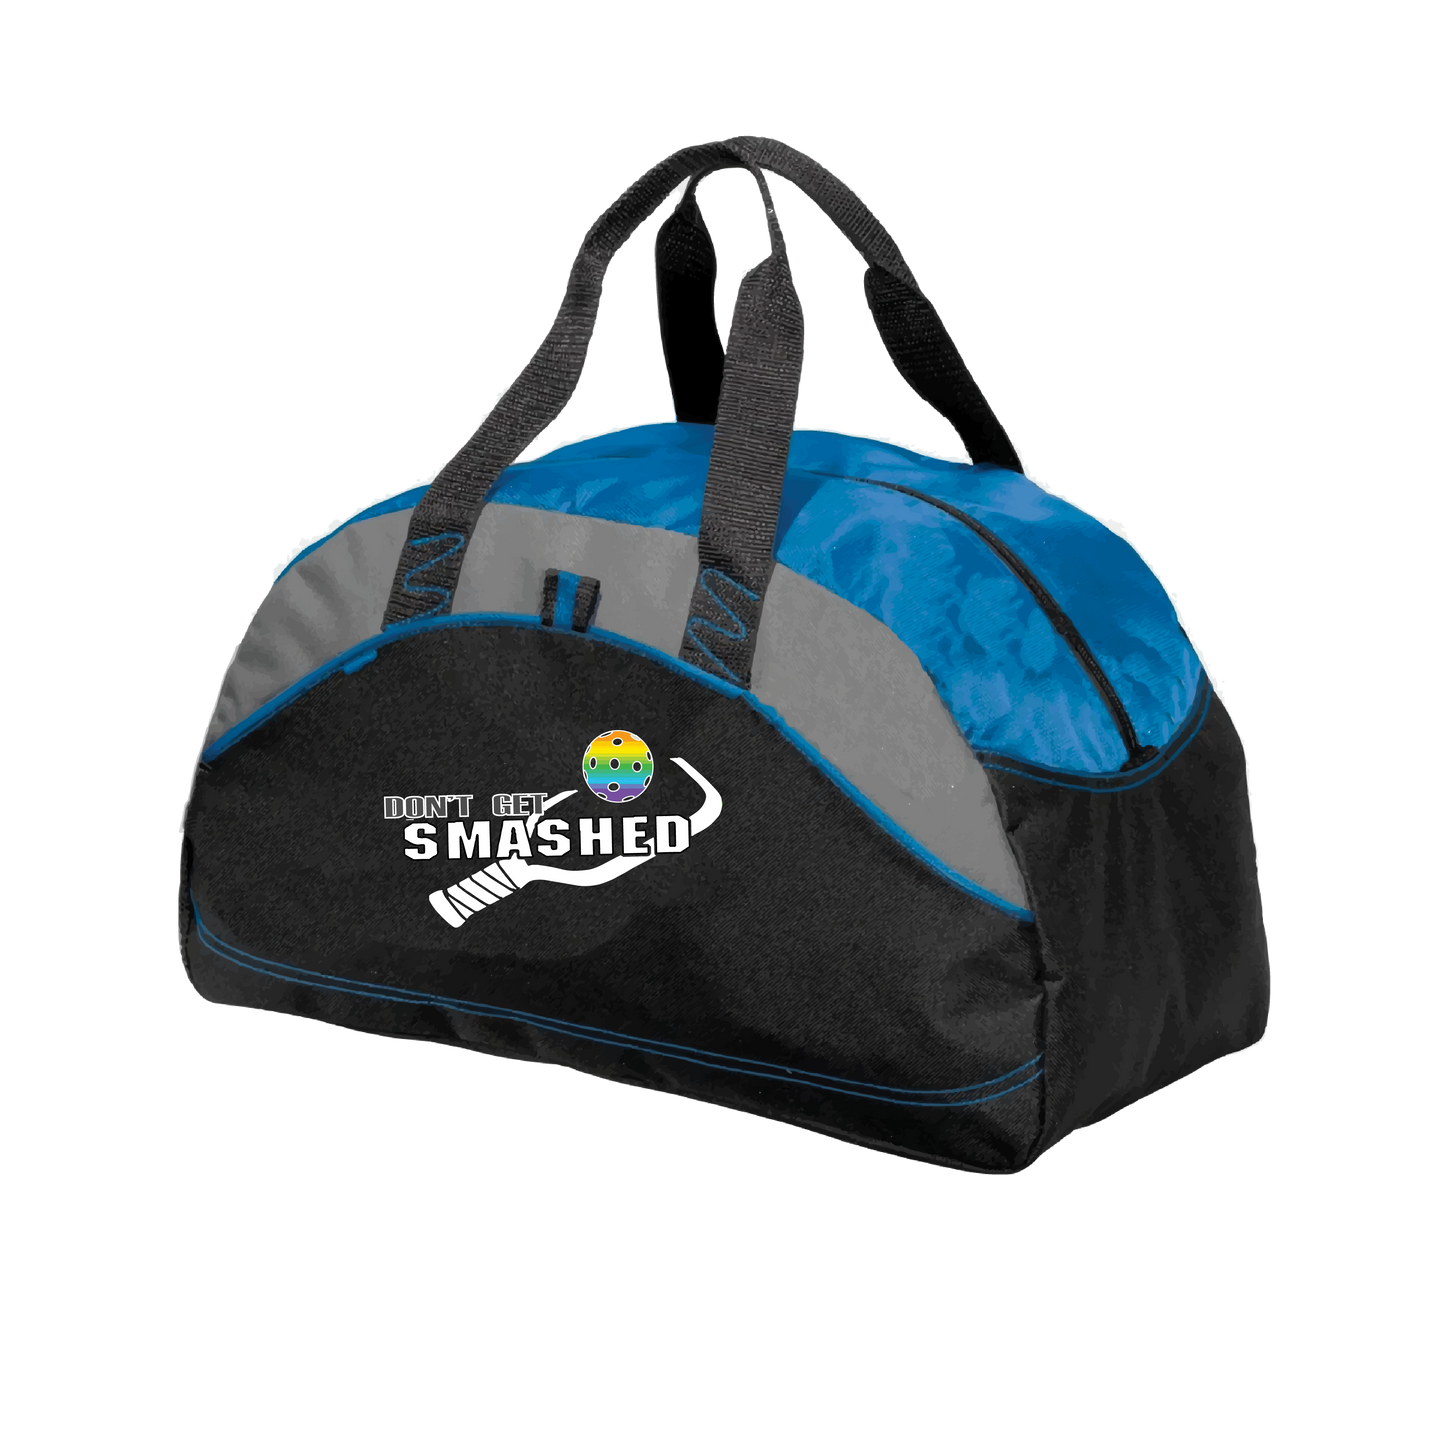 Don't Get Smashed (Customizable Ball Color) | Pickleball Sports Duffel | Medium Size Court Bag